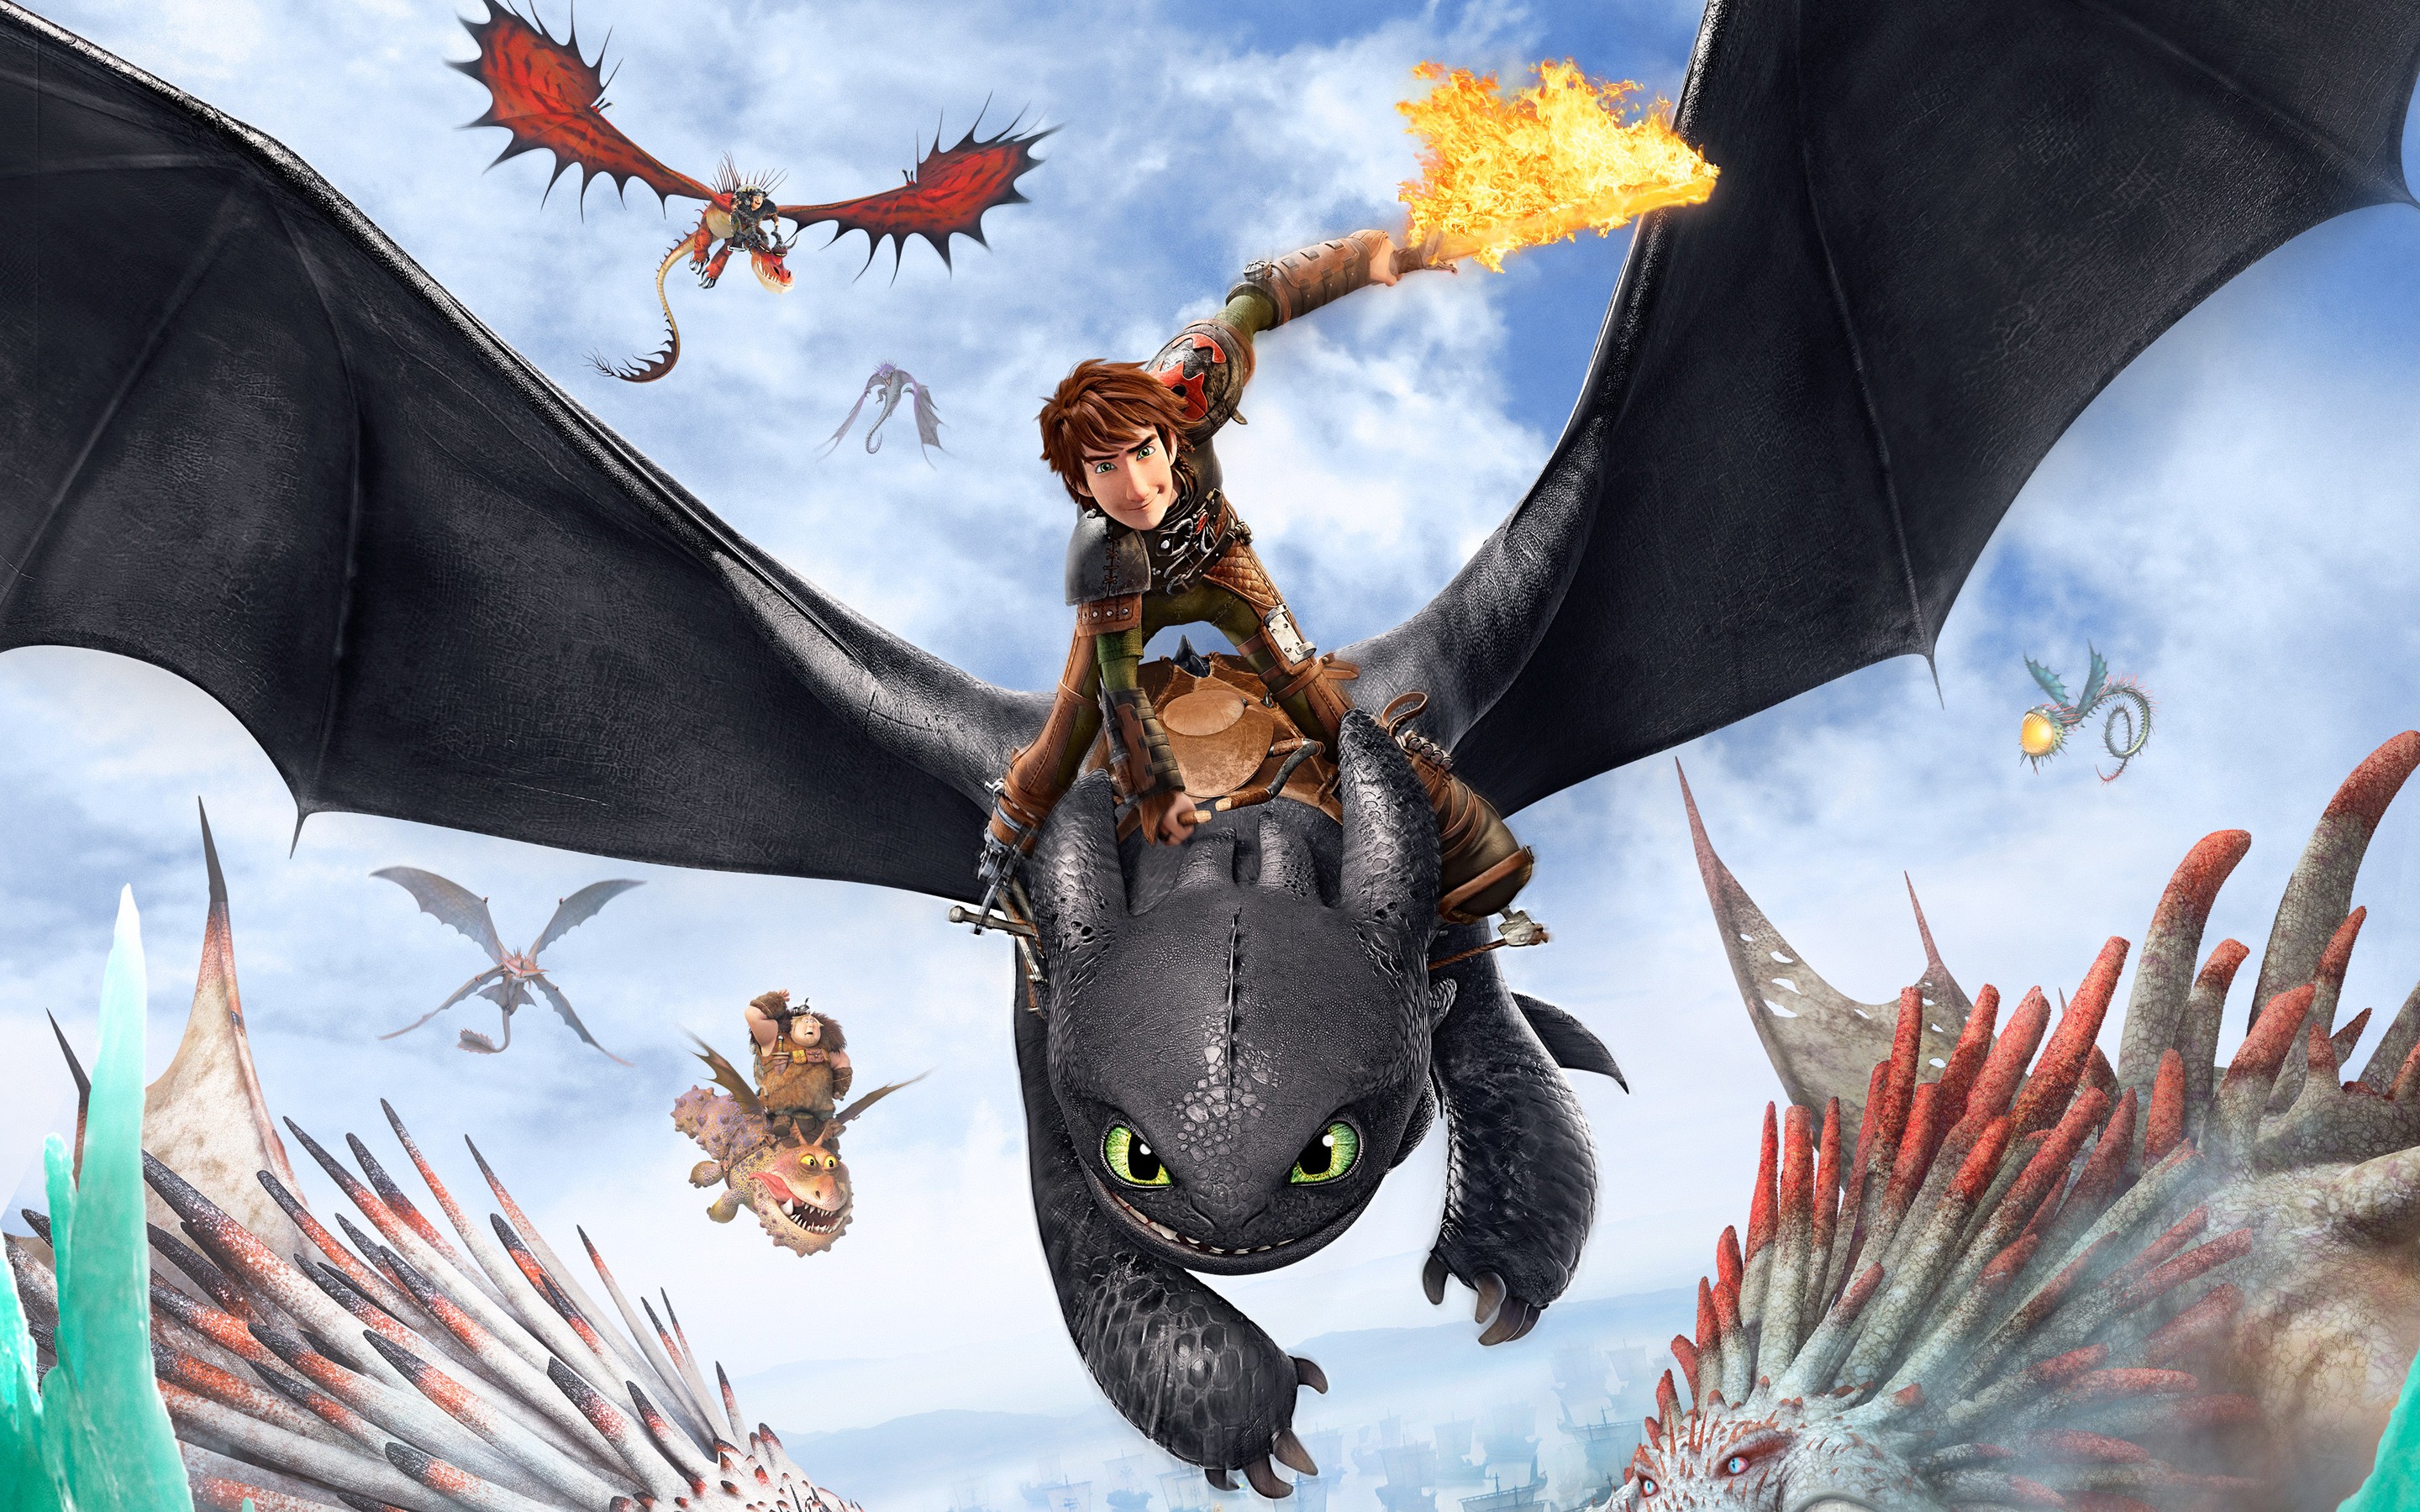 How To Train Your Dragon Wallpaper Full HD 8aqh3o2 4usky